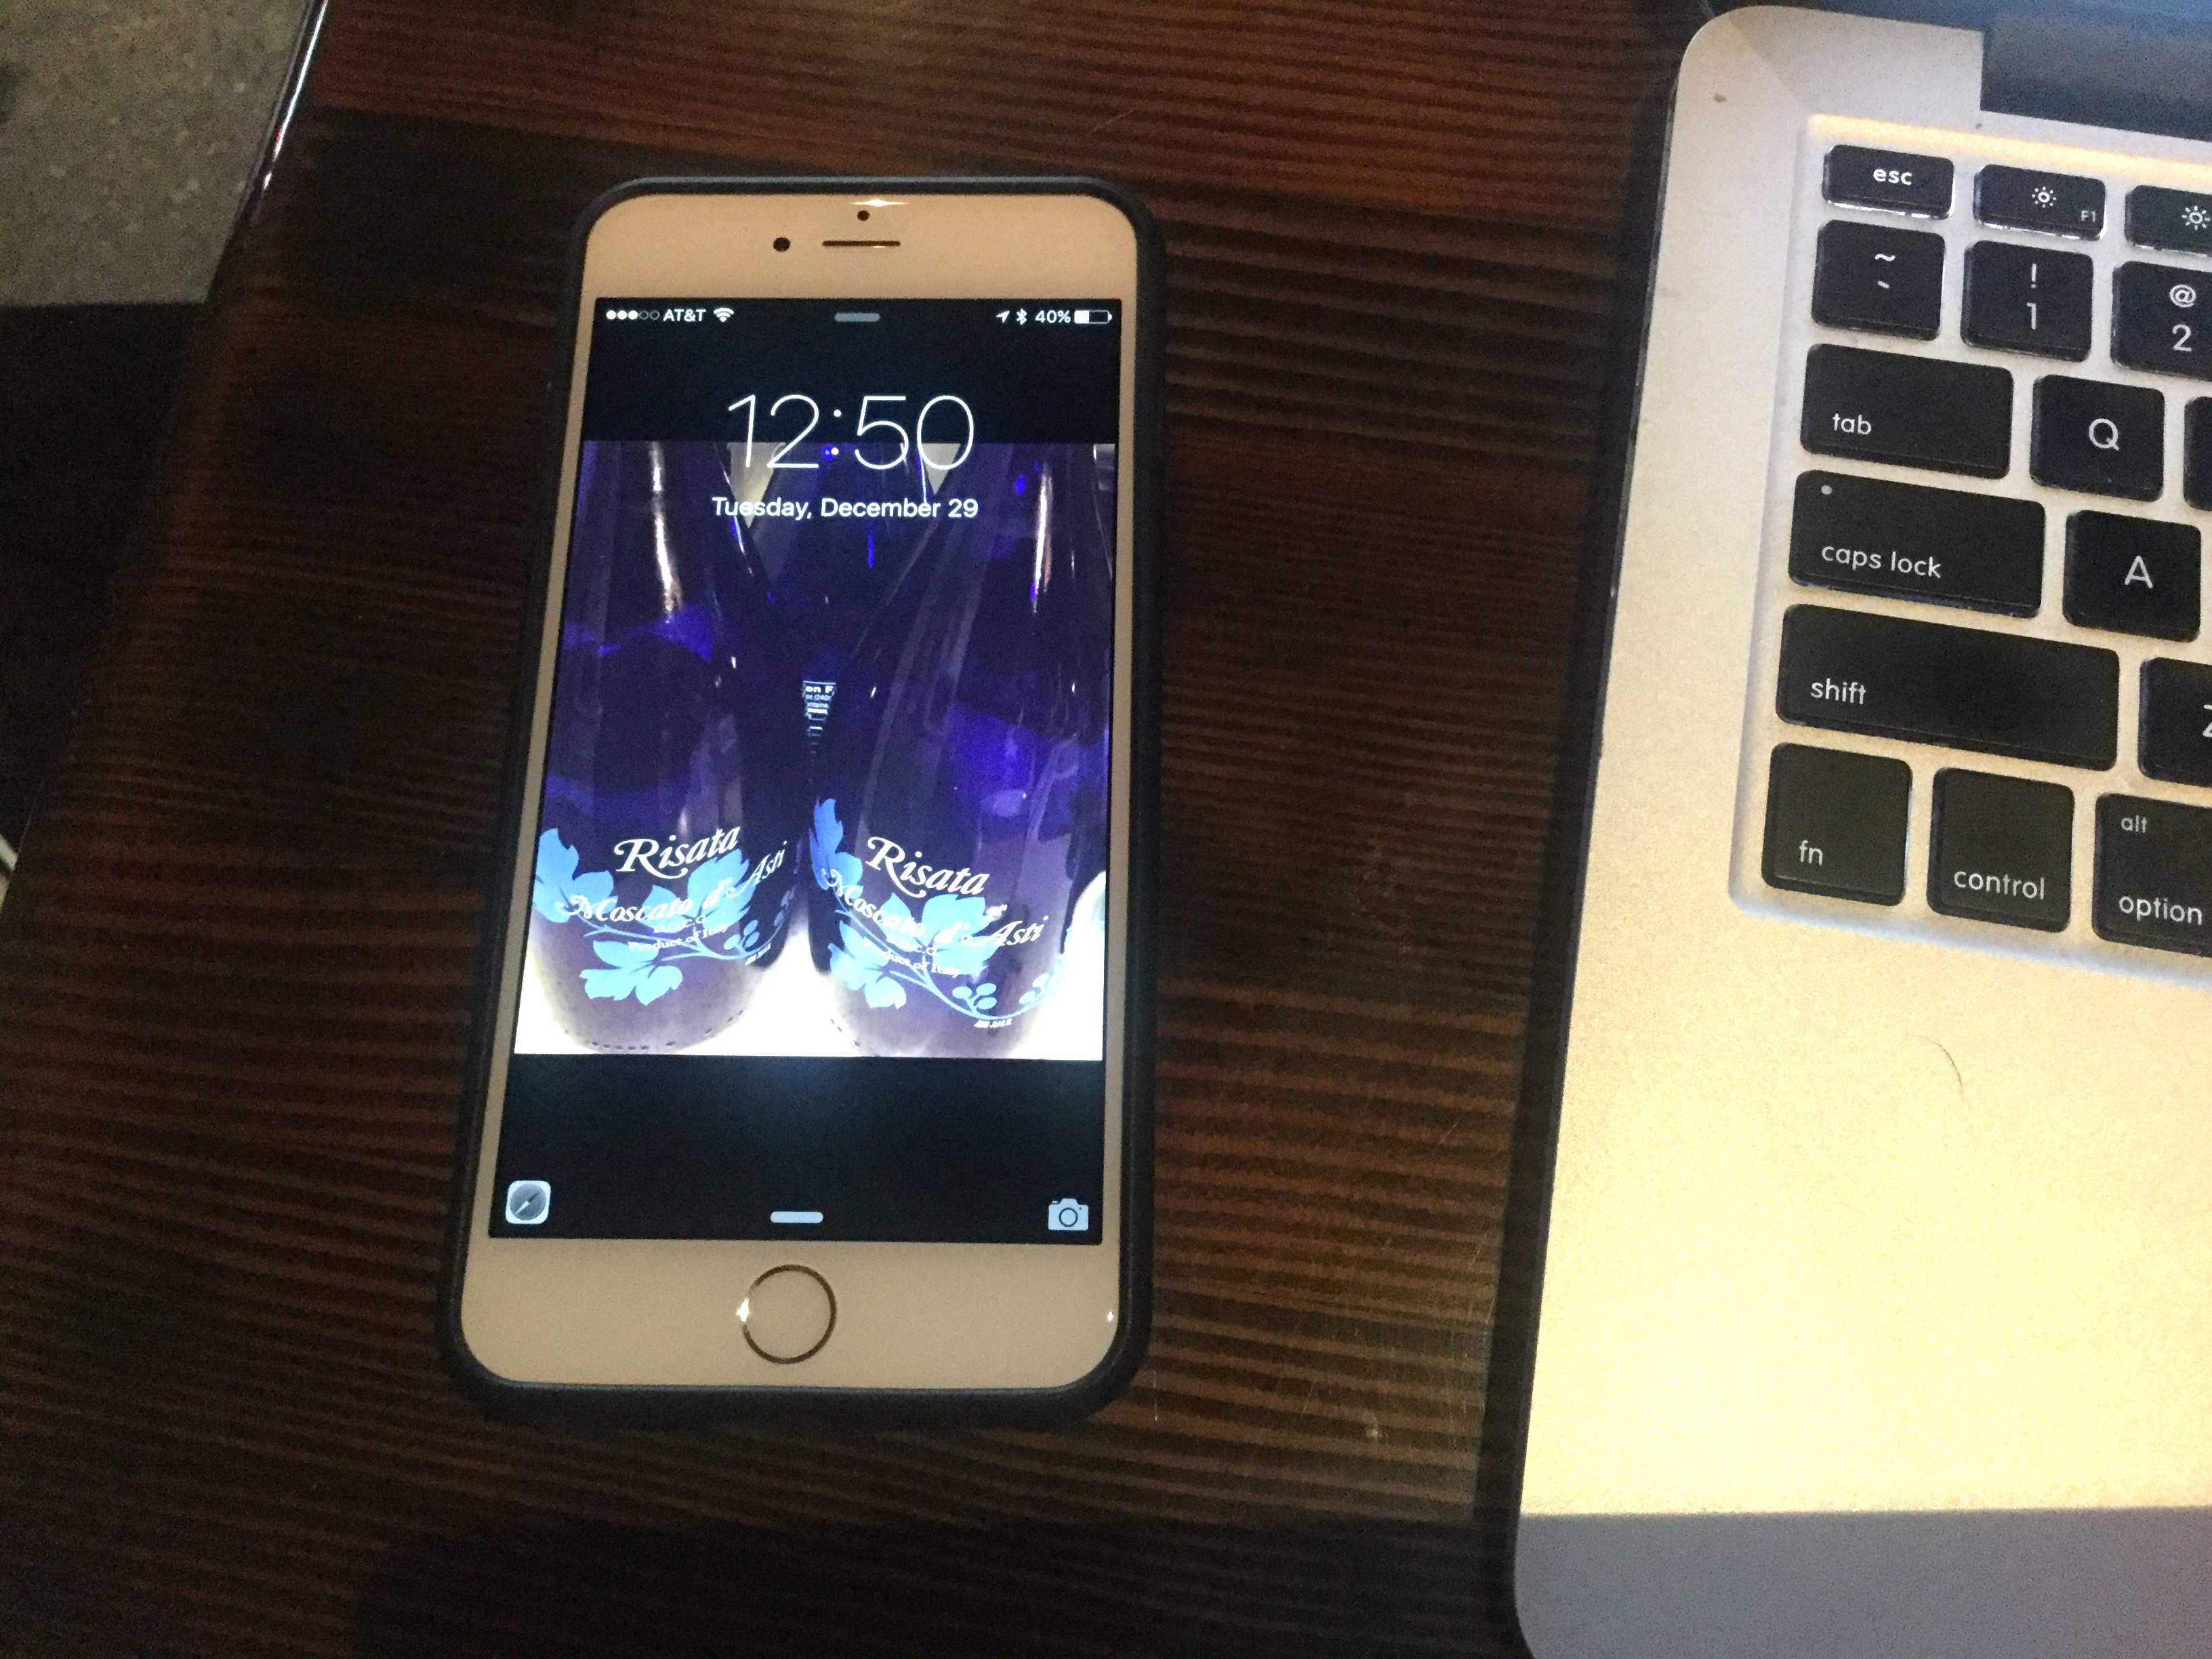 How to keep iPhone from ruining your square lock-screen photos | Cult of Mac3264 x 2448